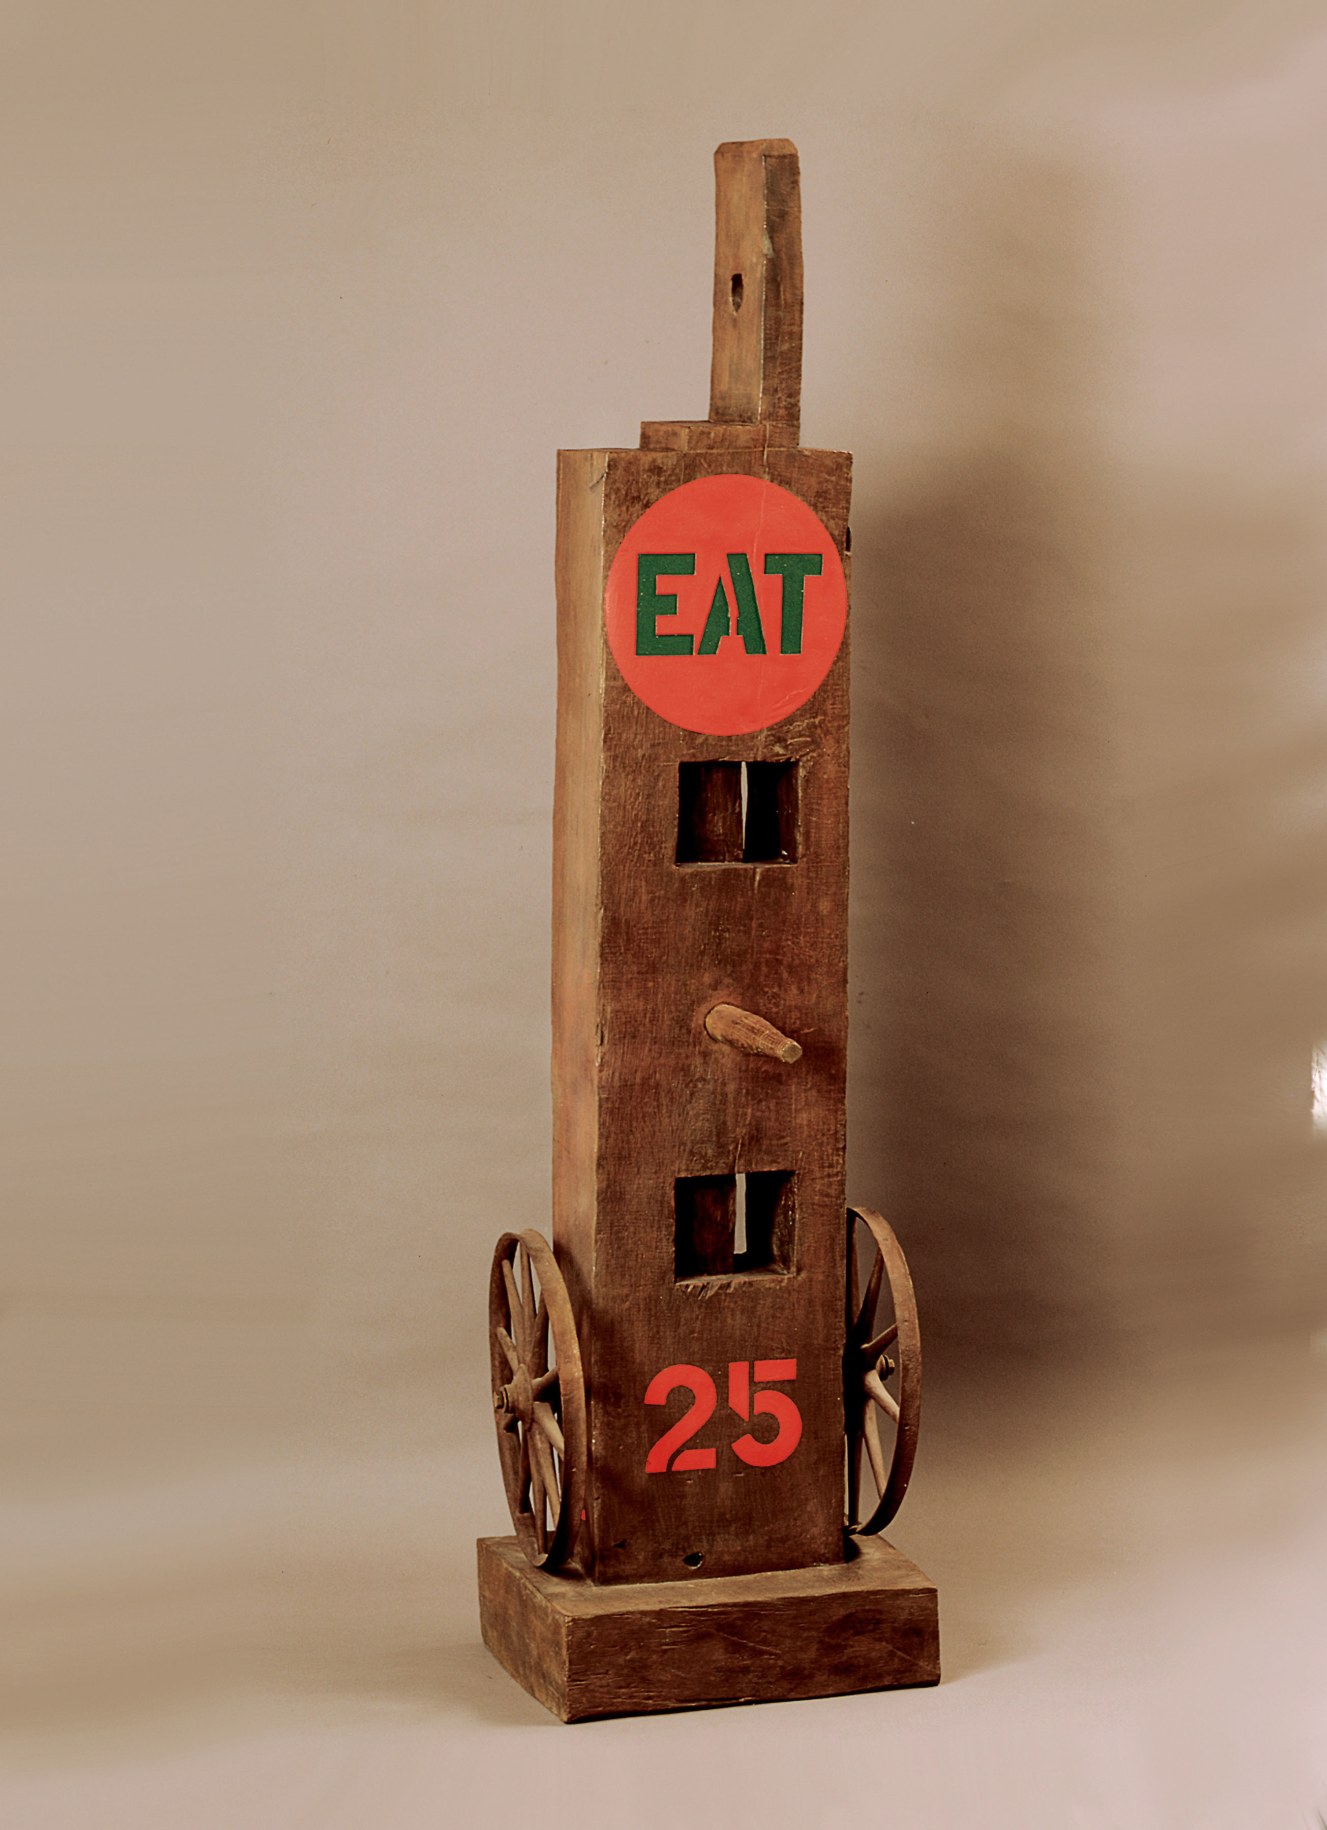 Eat, a 60 by 15 1/2 by 17 inch sculpture consisting of a wooden beam with a haunched tenon, standing on a wooden base. An iron and wooden wheel is affixed to the right and left sides at the bottom of the sculpture. In between a red number 25 has been painted. A wooden peg protrudes from the center of the sculpture, and at the top of the sculpture is a red circle containing the word &quot;eat&quot; painted in green stenciled letters.